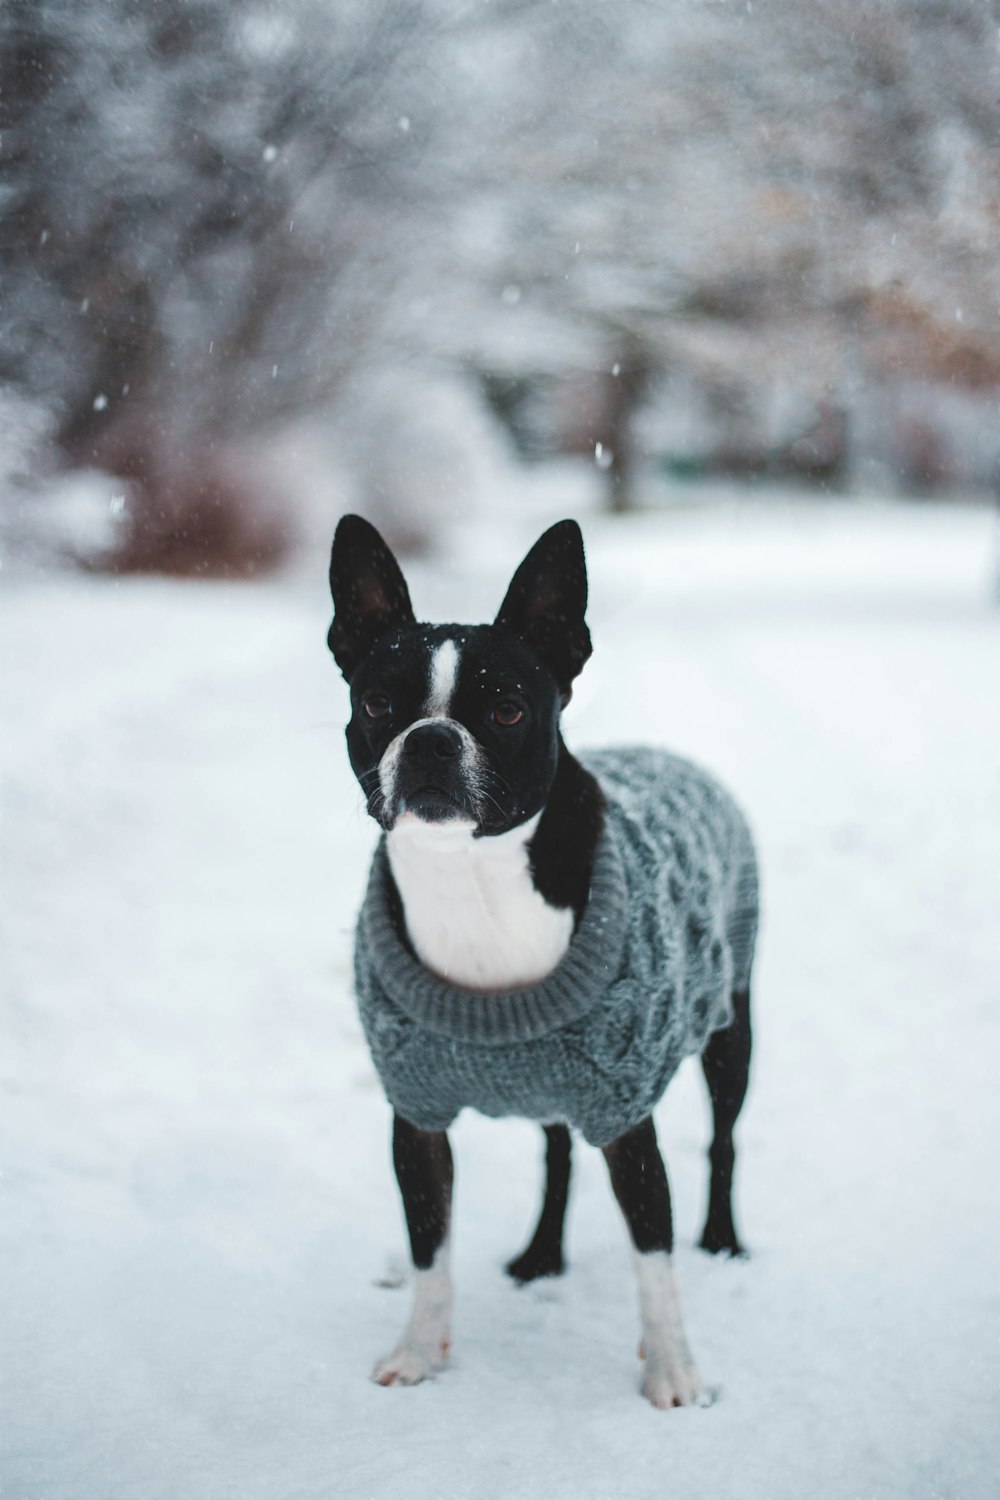 white and black dog wearing gray sweater standing on snowfield